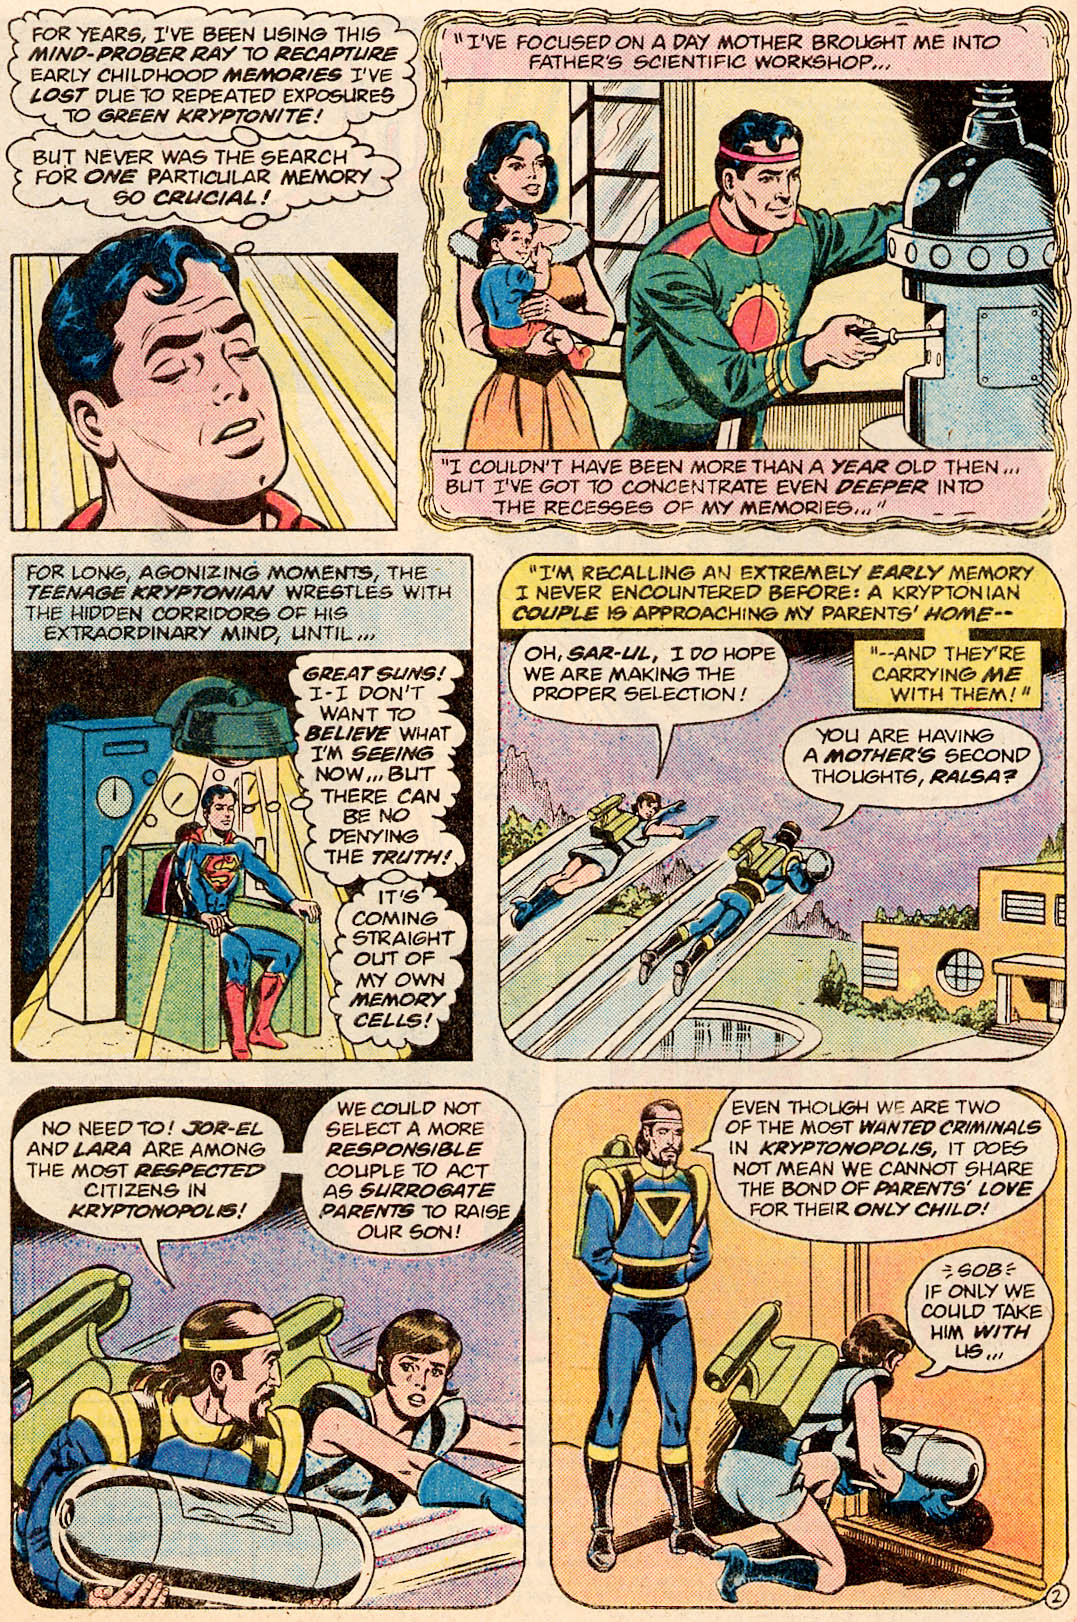 The New Adventures of Superboy 28 Page 2